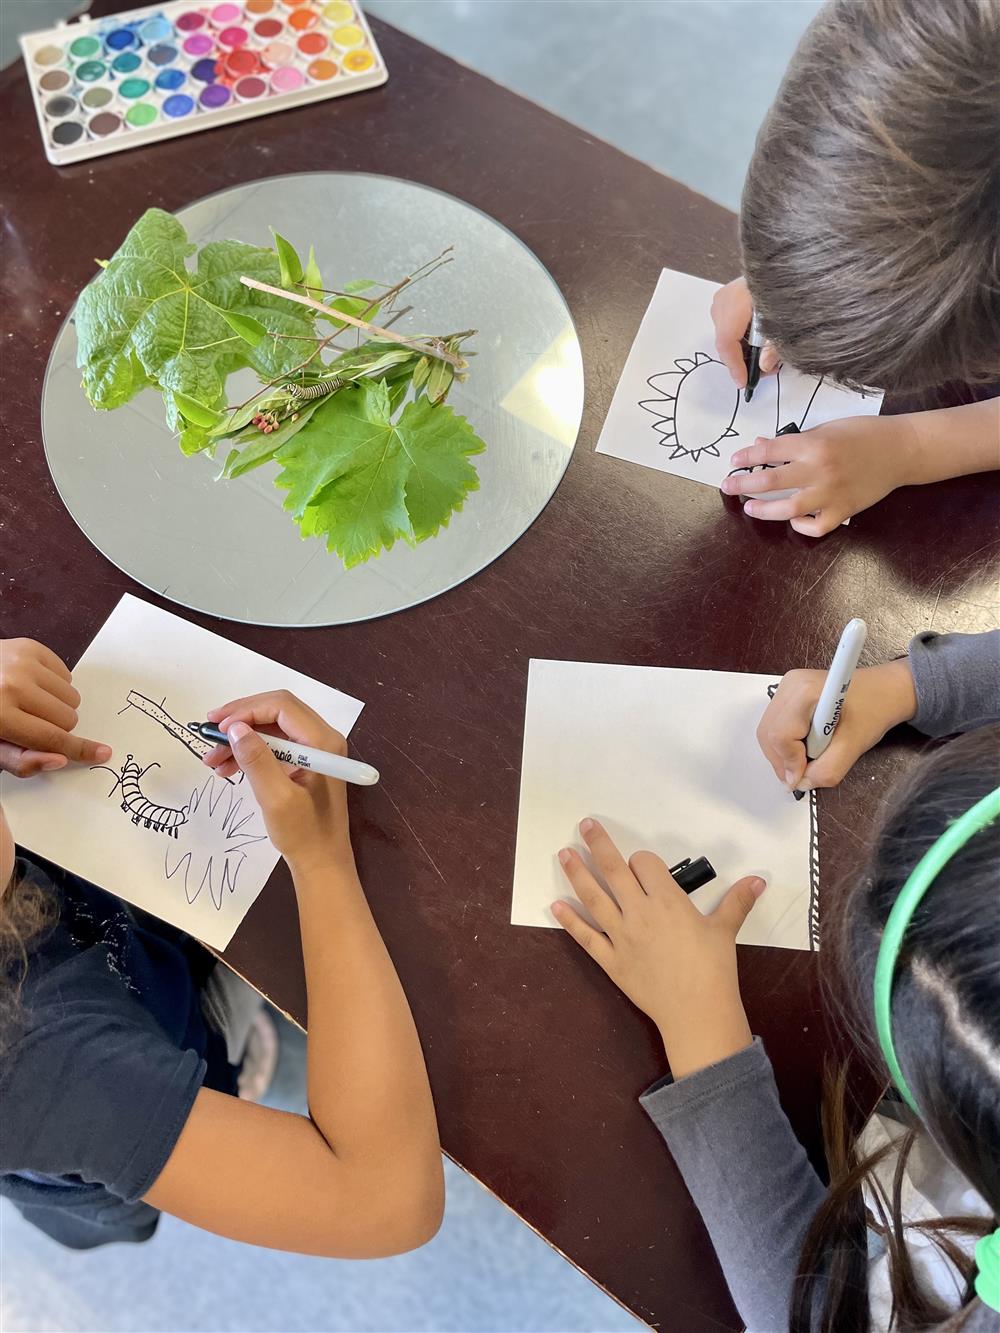 3 students sitting at a table investigating leaves and drawing them on a paper with black marker.